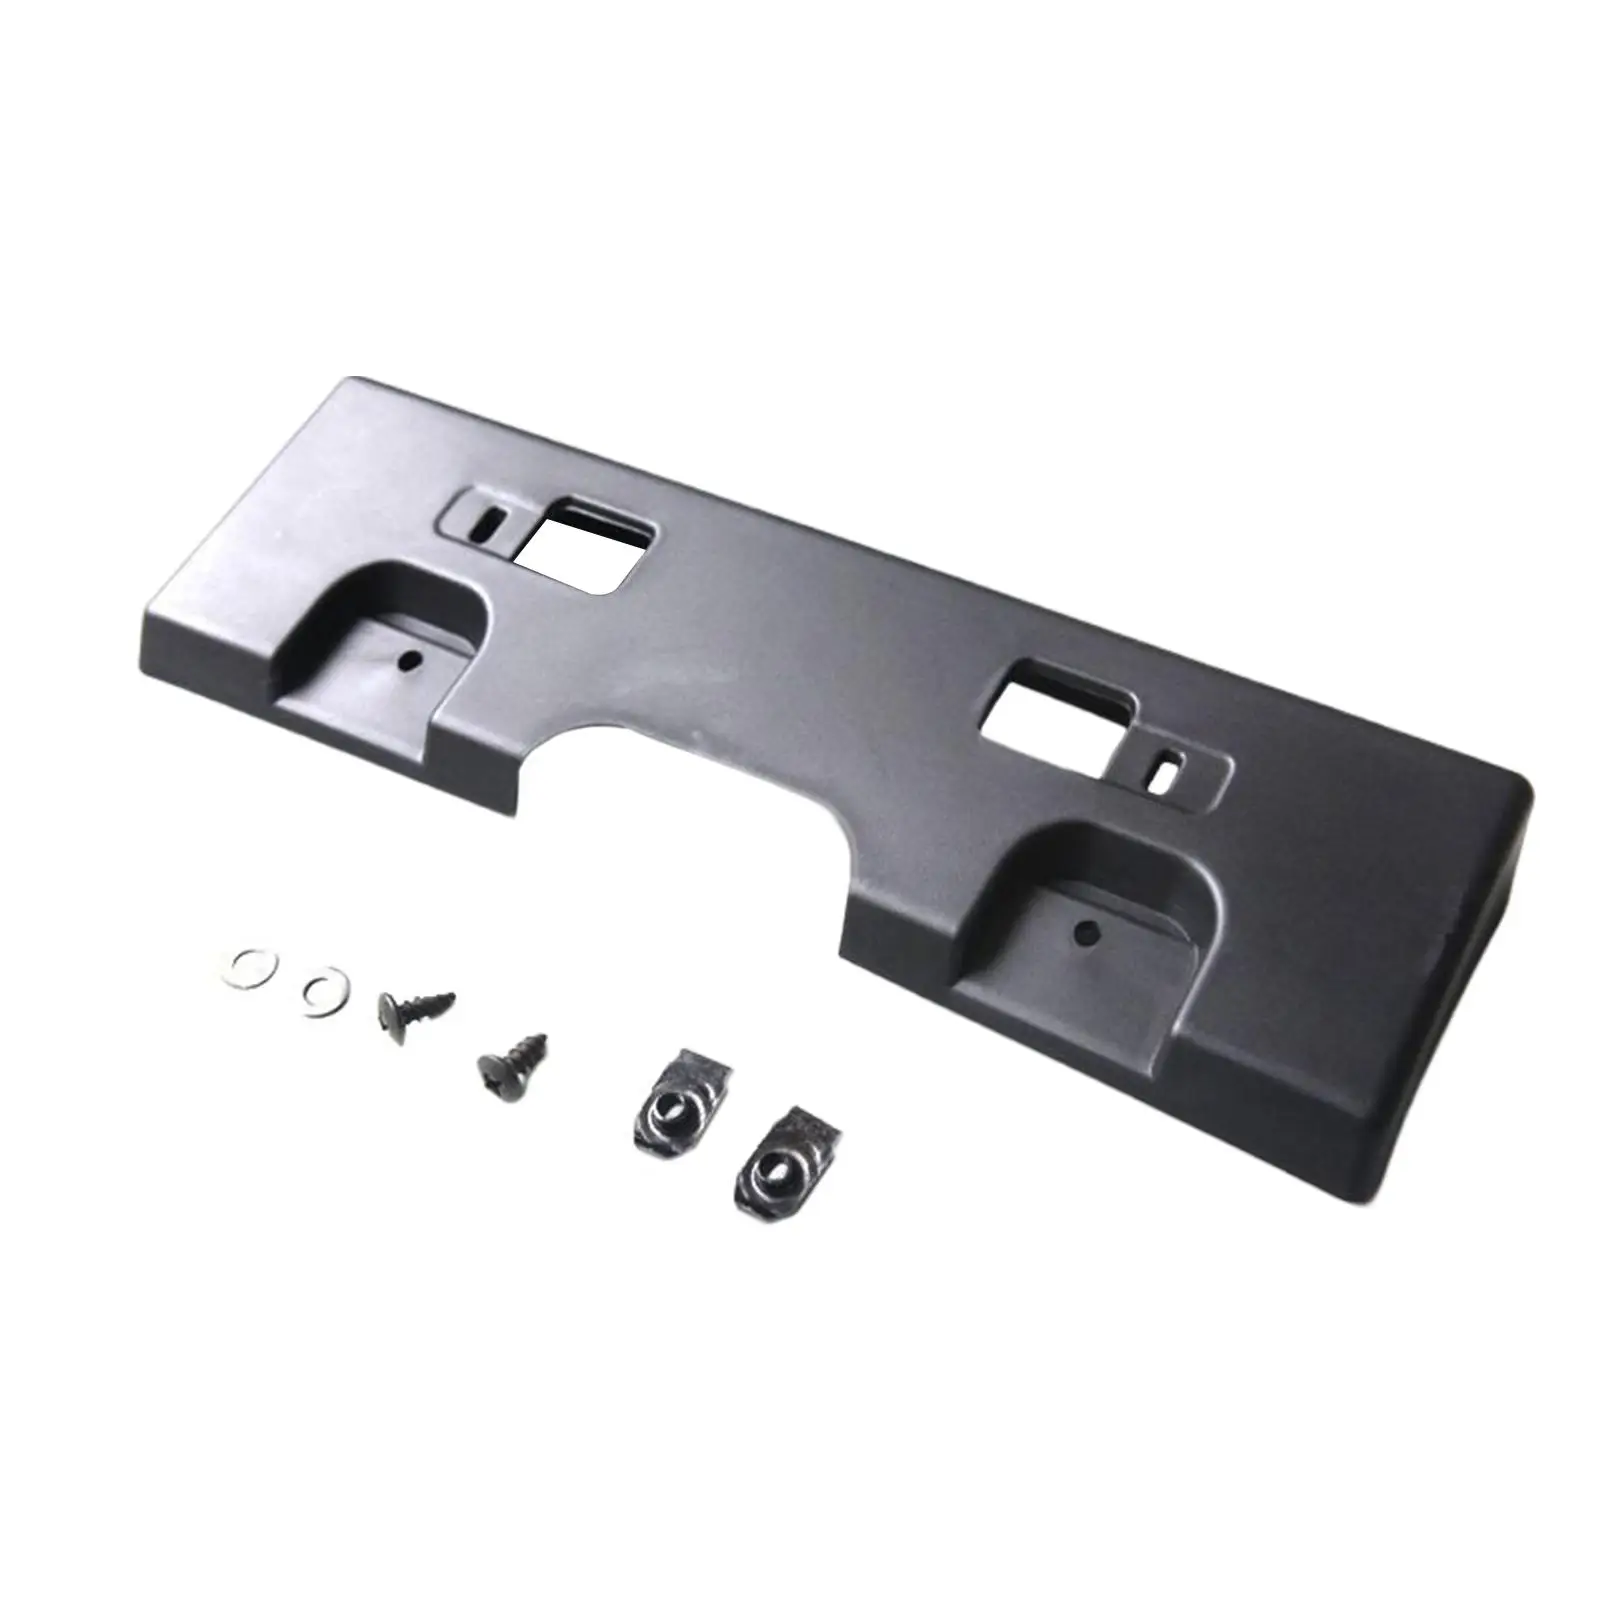 Front Bumper License Plate Bracket License Tag Holder for SENTRA 2007-2012 847227091233 Car Supplies Replacement